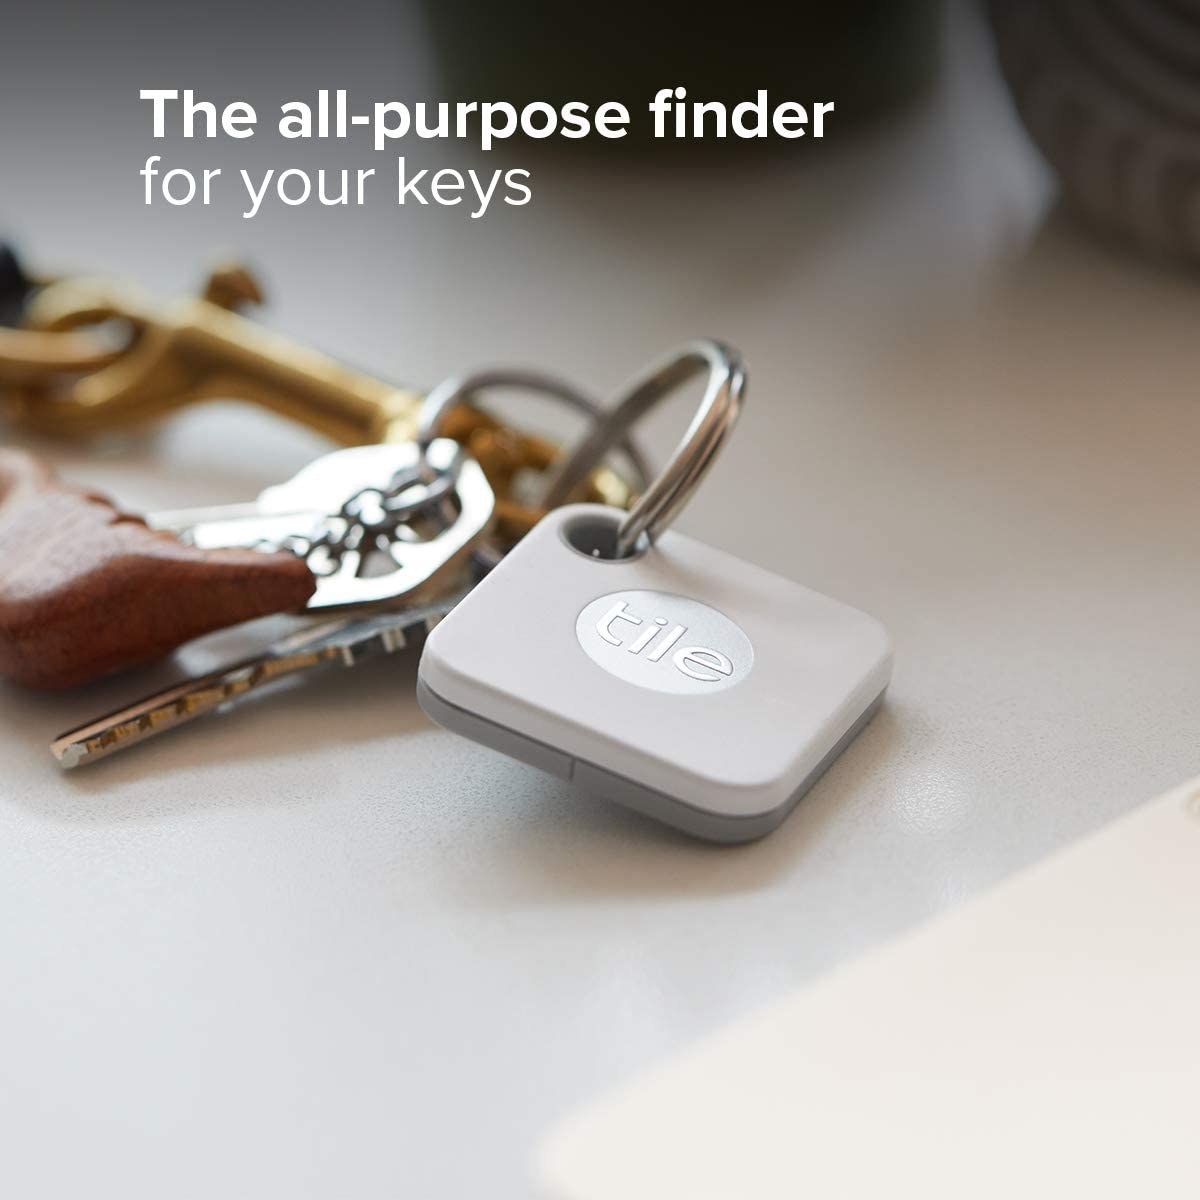 A white square Tile Mate attached to a key ring 